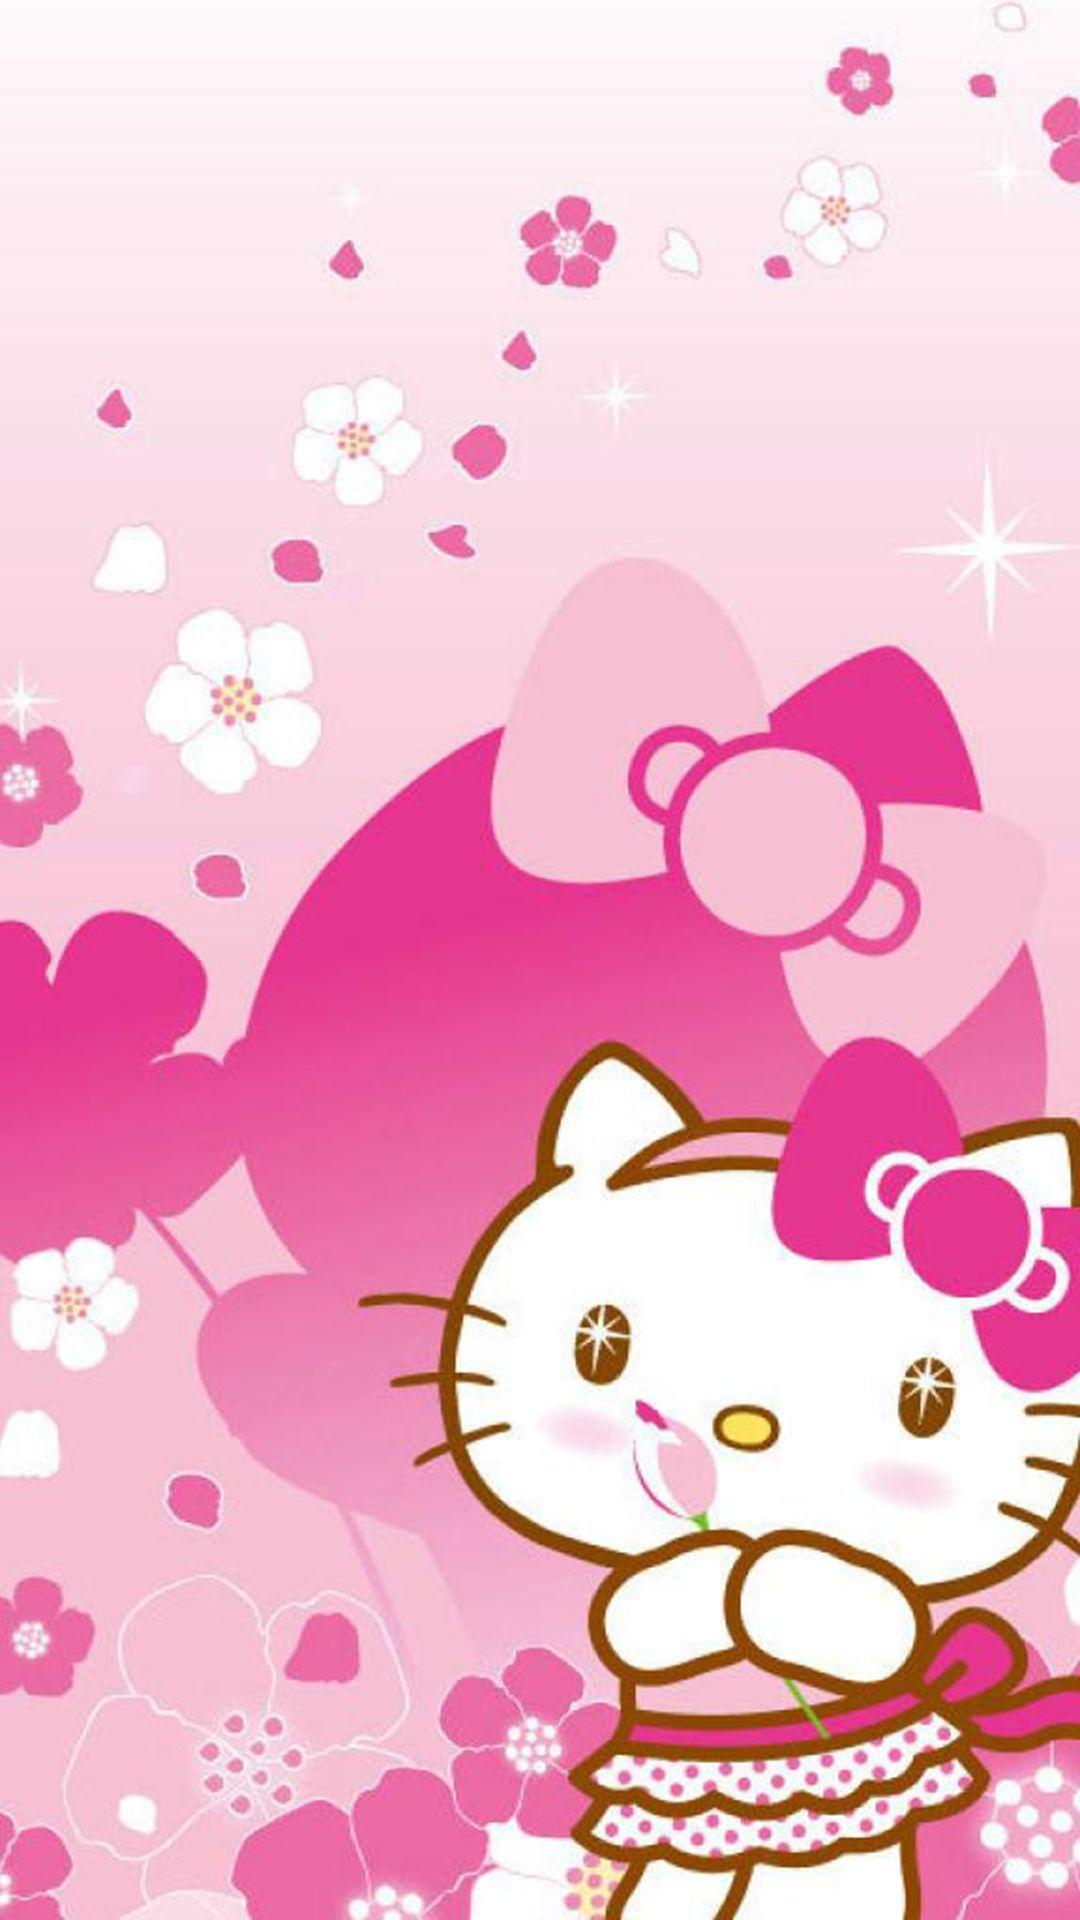 Hello Kitty 2016 Wallpapers - Wallpaper Cave